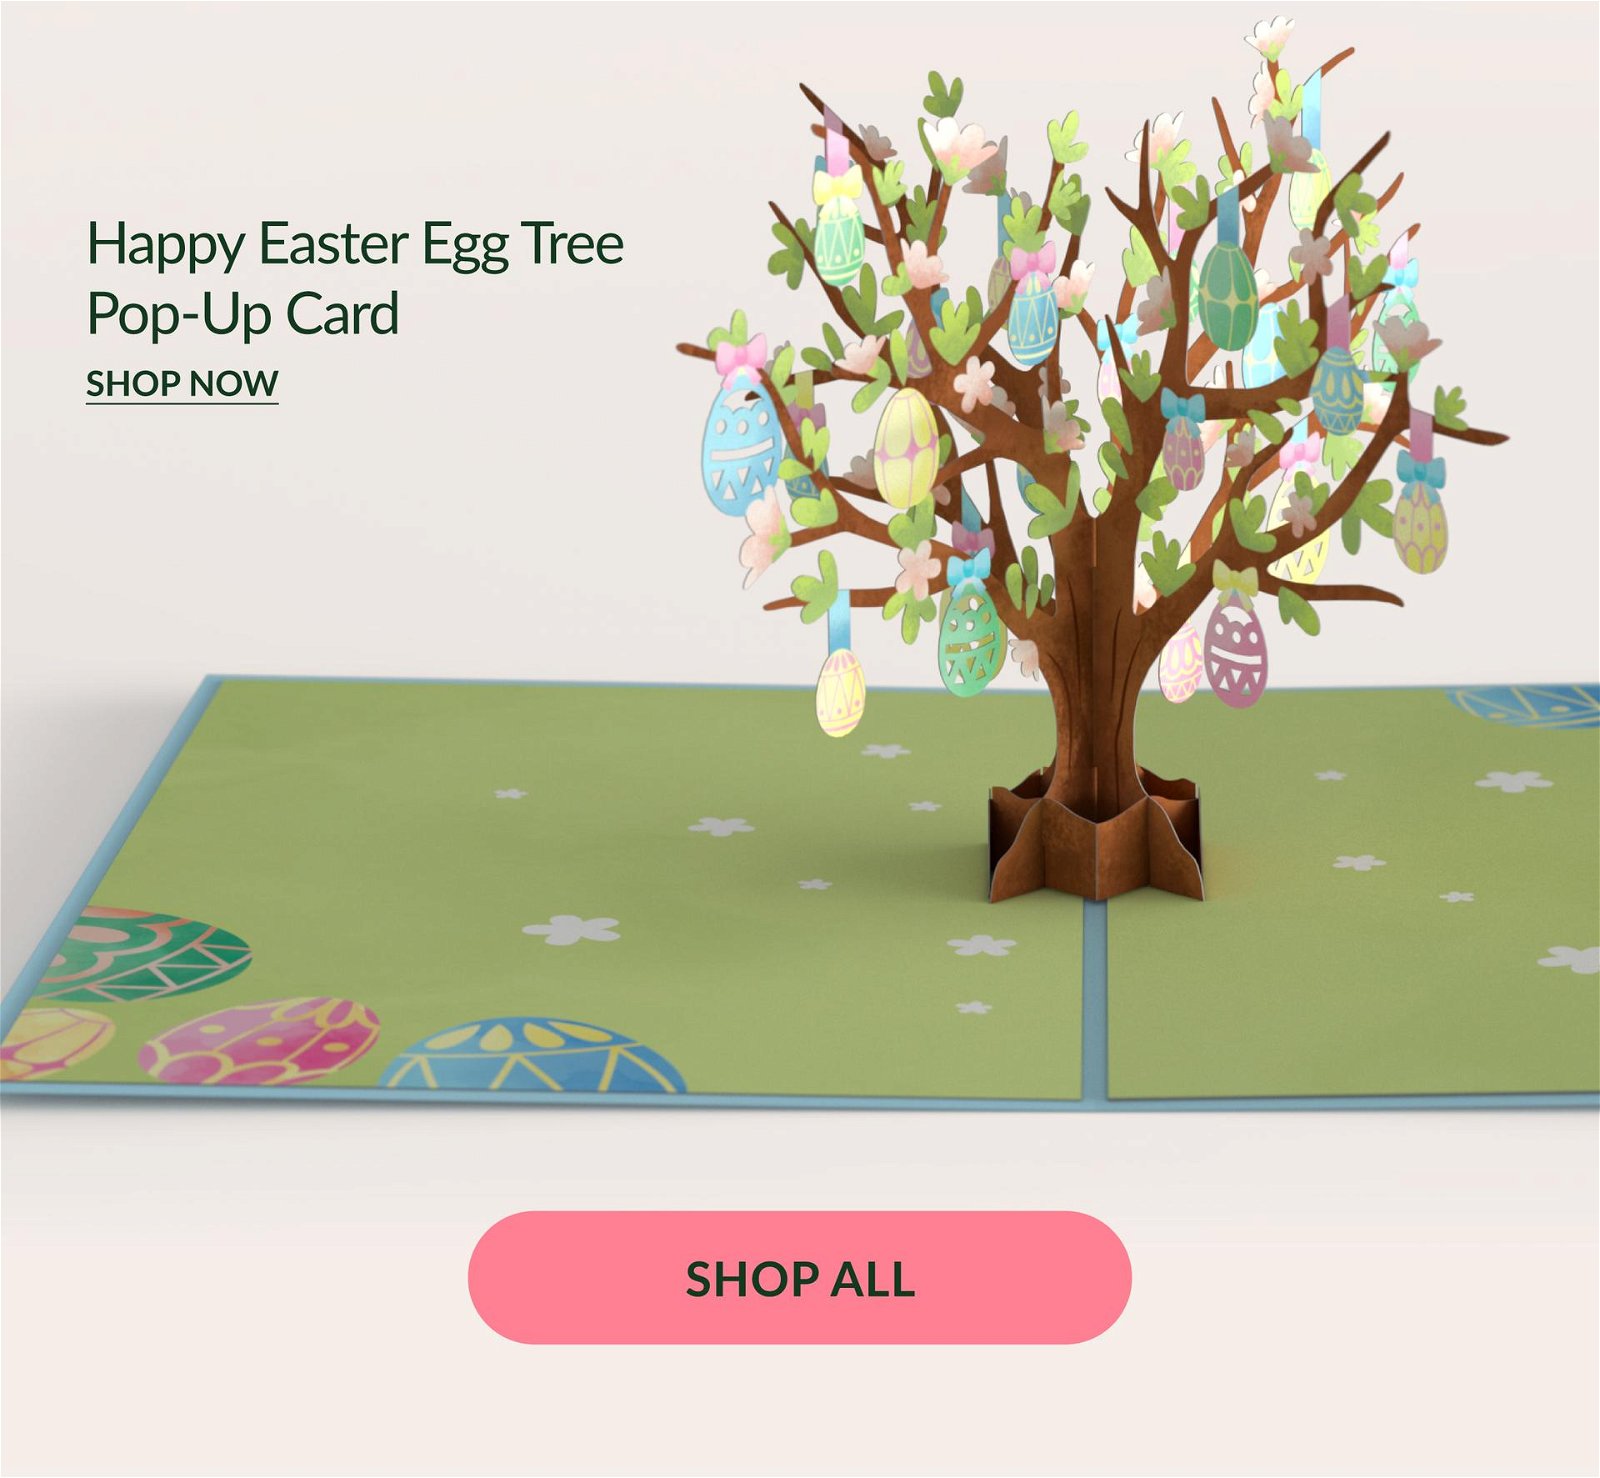 Happy Easter Egg Tree Pop-Up Card